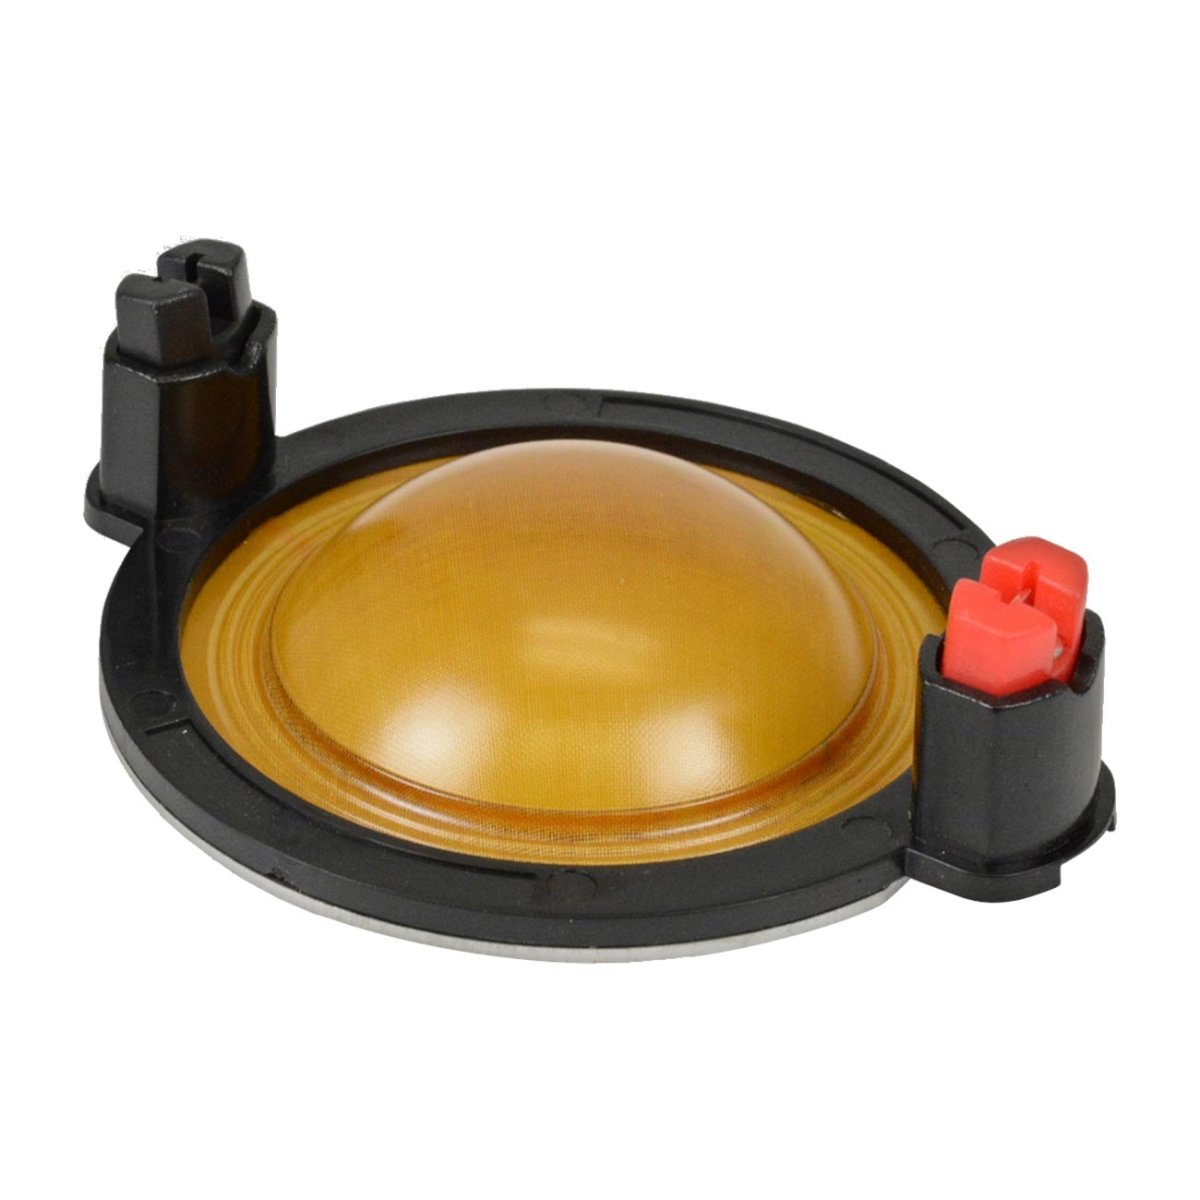 Picture of Audiopipe ADR250VC Replacement Kapton Voice Coil for ADR250 Compression Driver